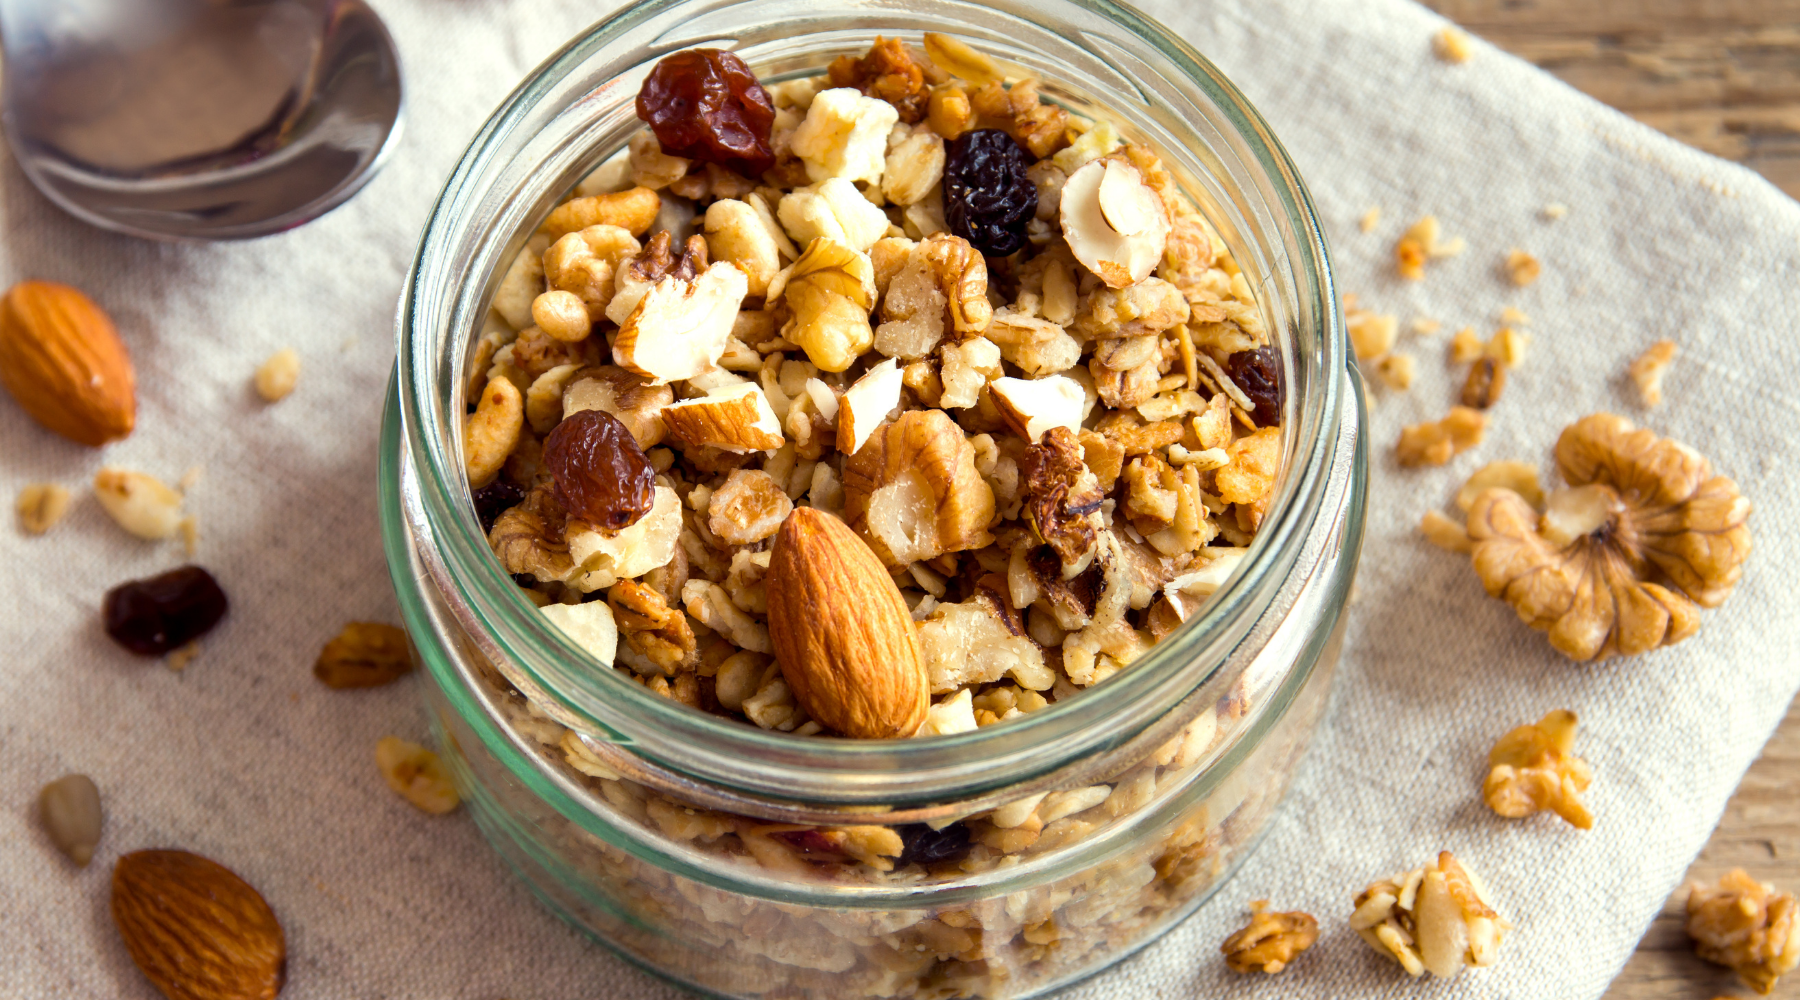 IS GRANOLA GOOD FOR YOU? THE ABSOLUTE TRUTH